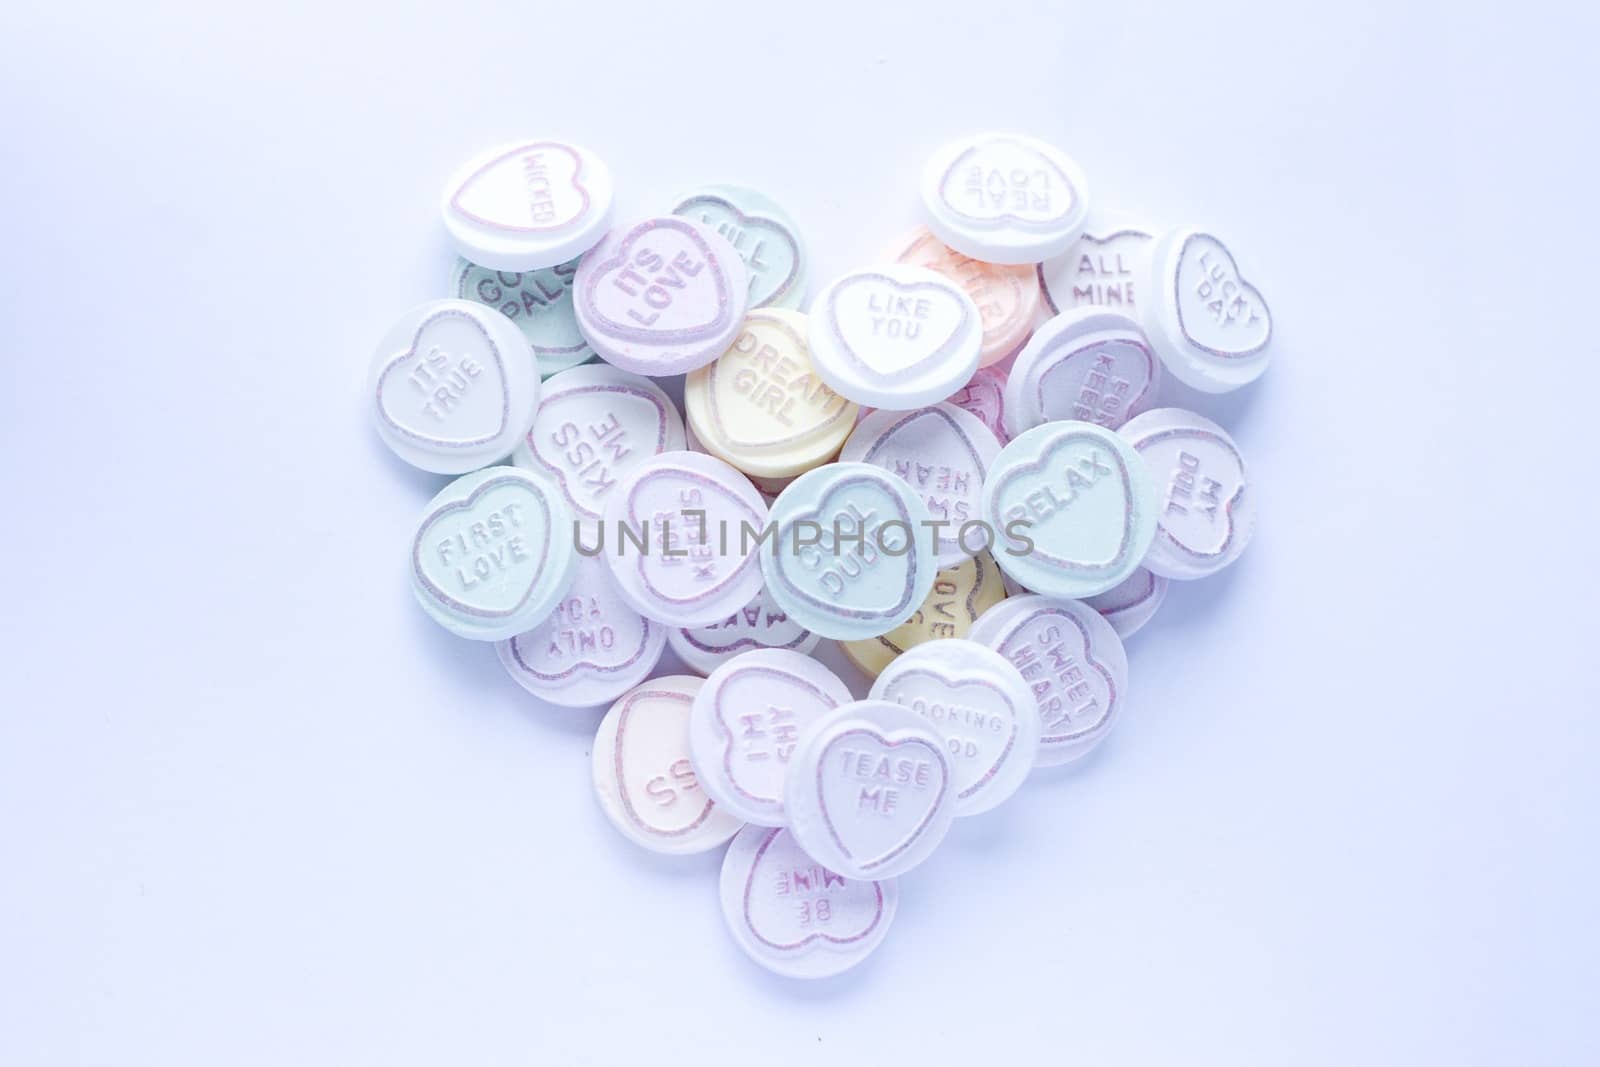 Sweets with text in a heart shape against a white background. This type of confectionary is produced by Swizzles Matlow in the UK.